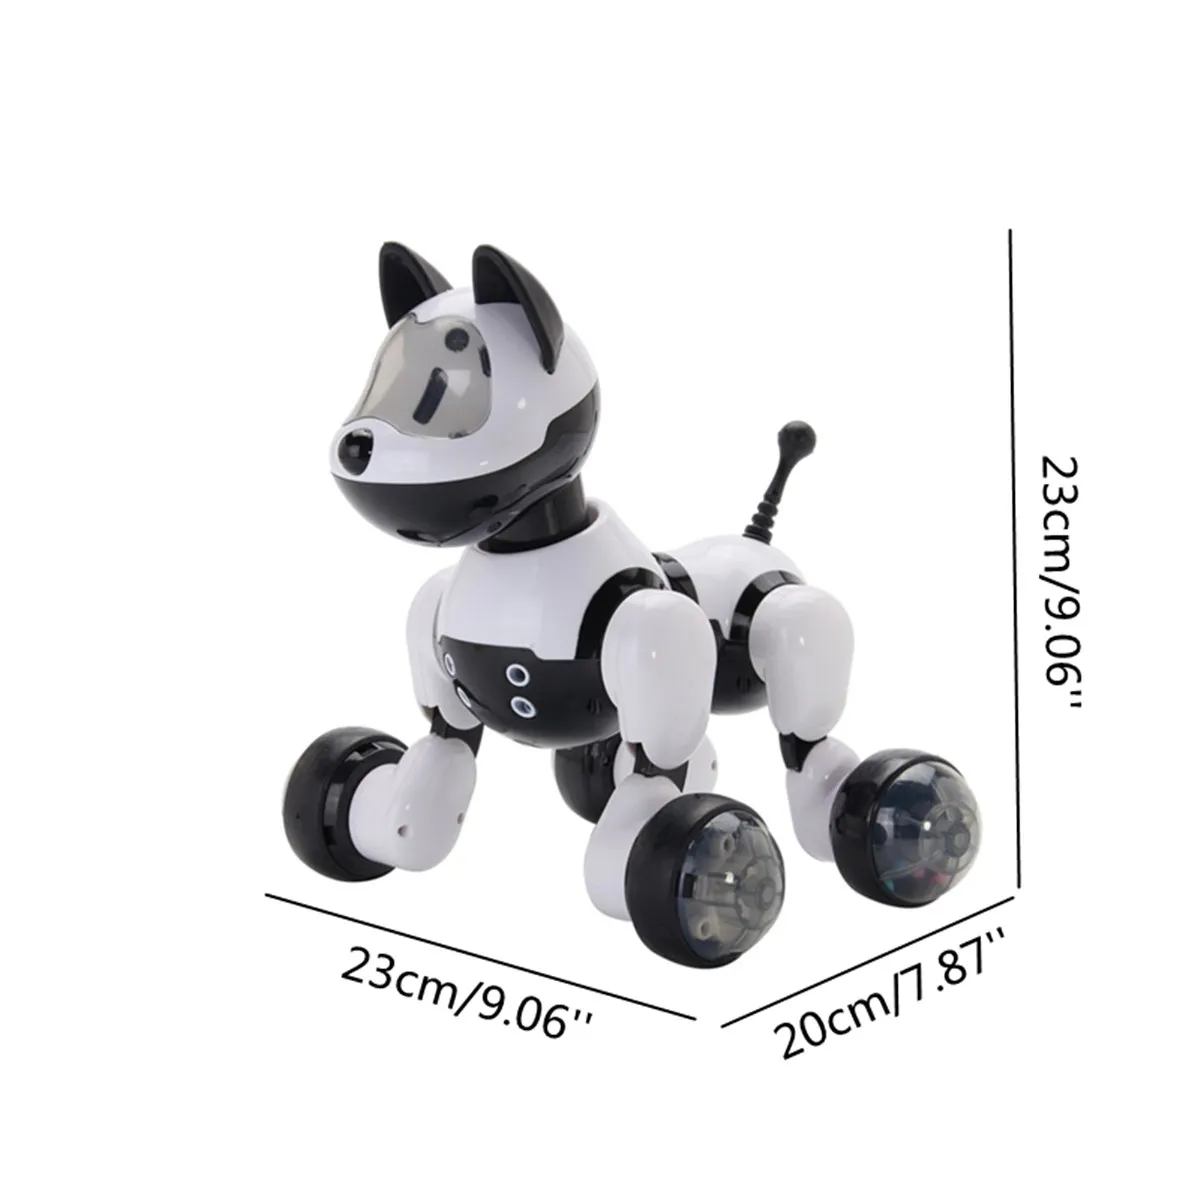 Intelligent Dance Robot Dog Electronic Pet Toys With Music Light Voice Control Mode Sing Smart Dog Robot For Kids Gift Toys7438683